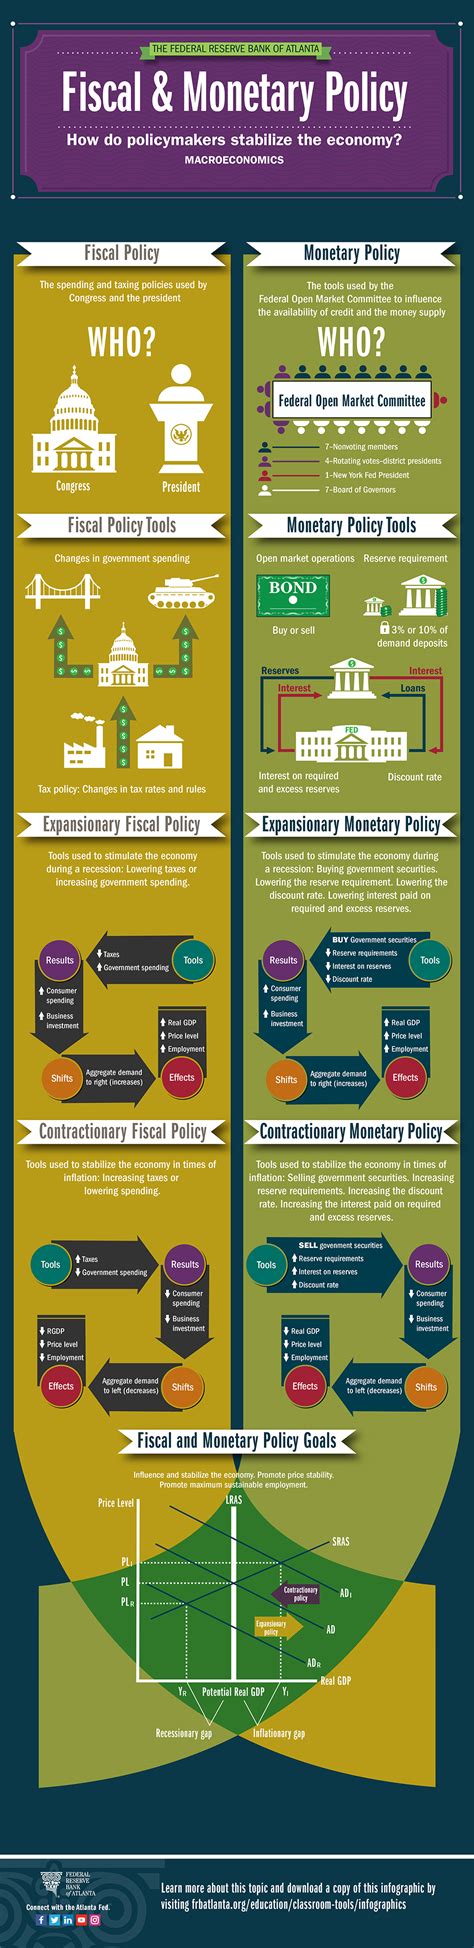 However, the impact of the two policies may vary or even cancel out each other. Infographic for Fiscal and Monetary Policy - Federal ...